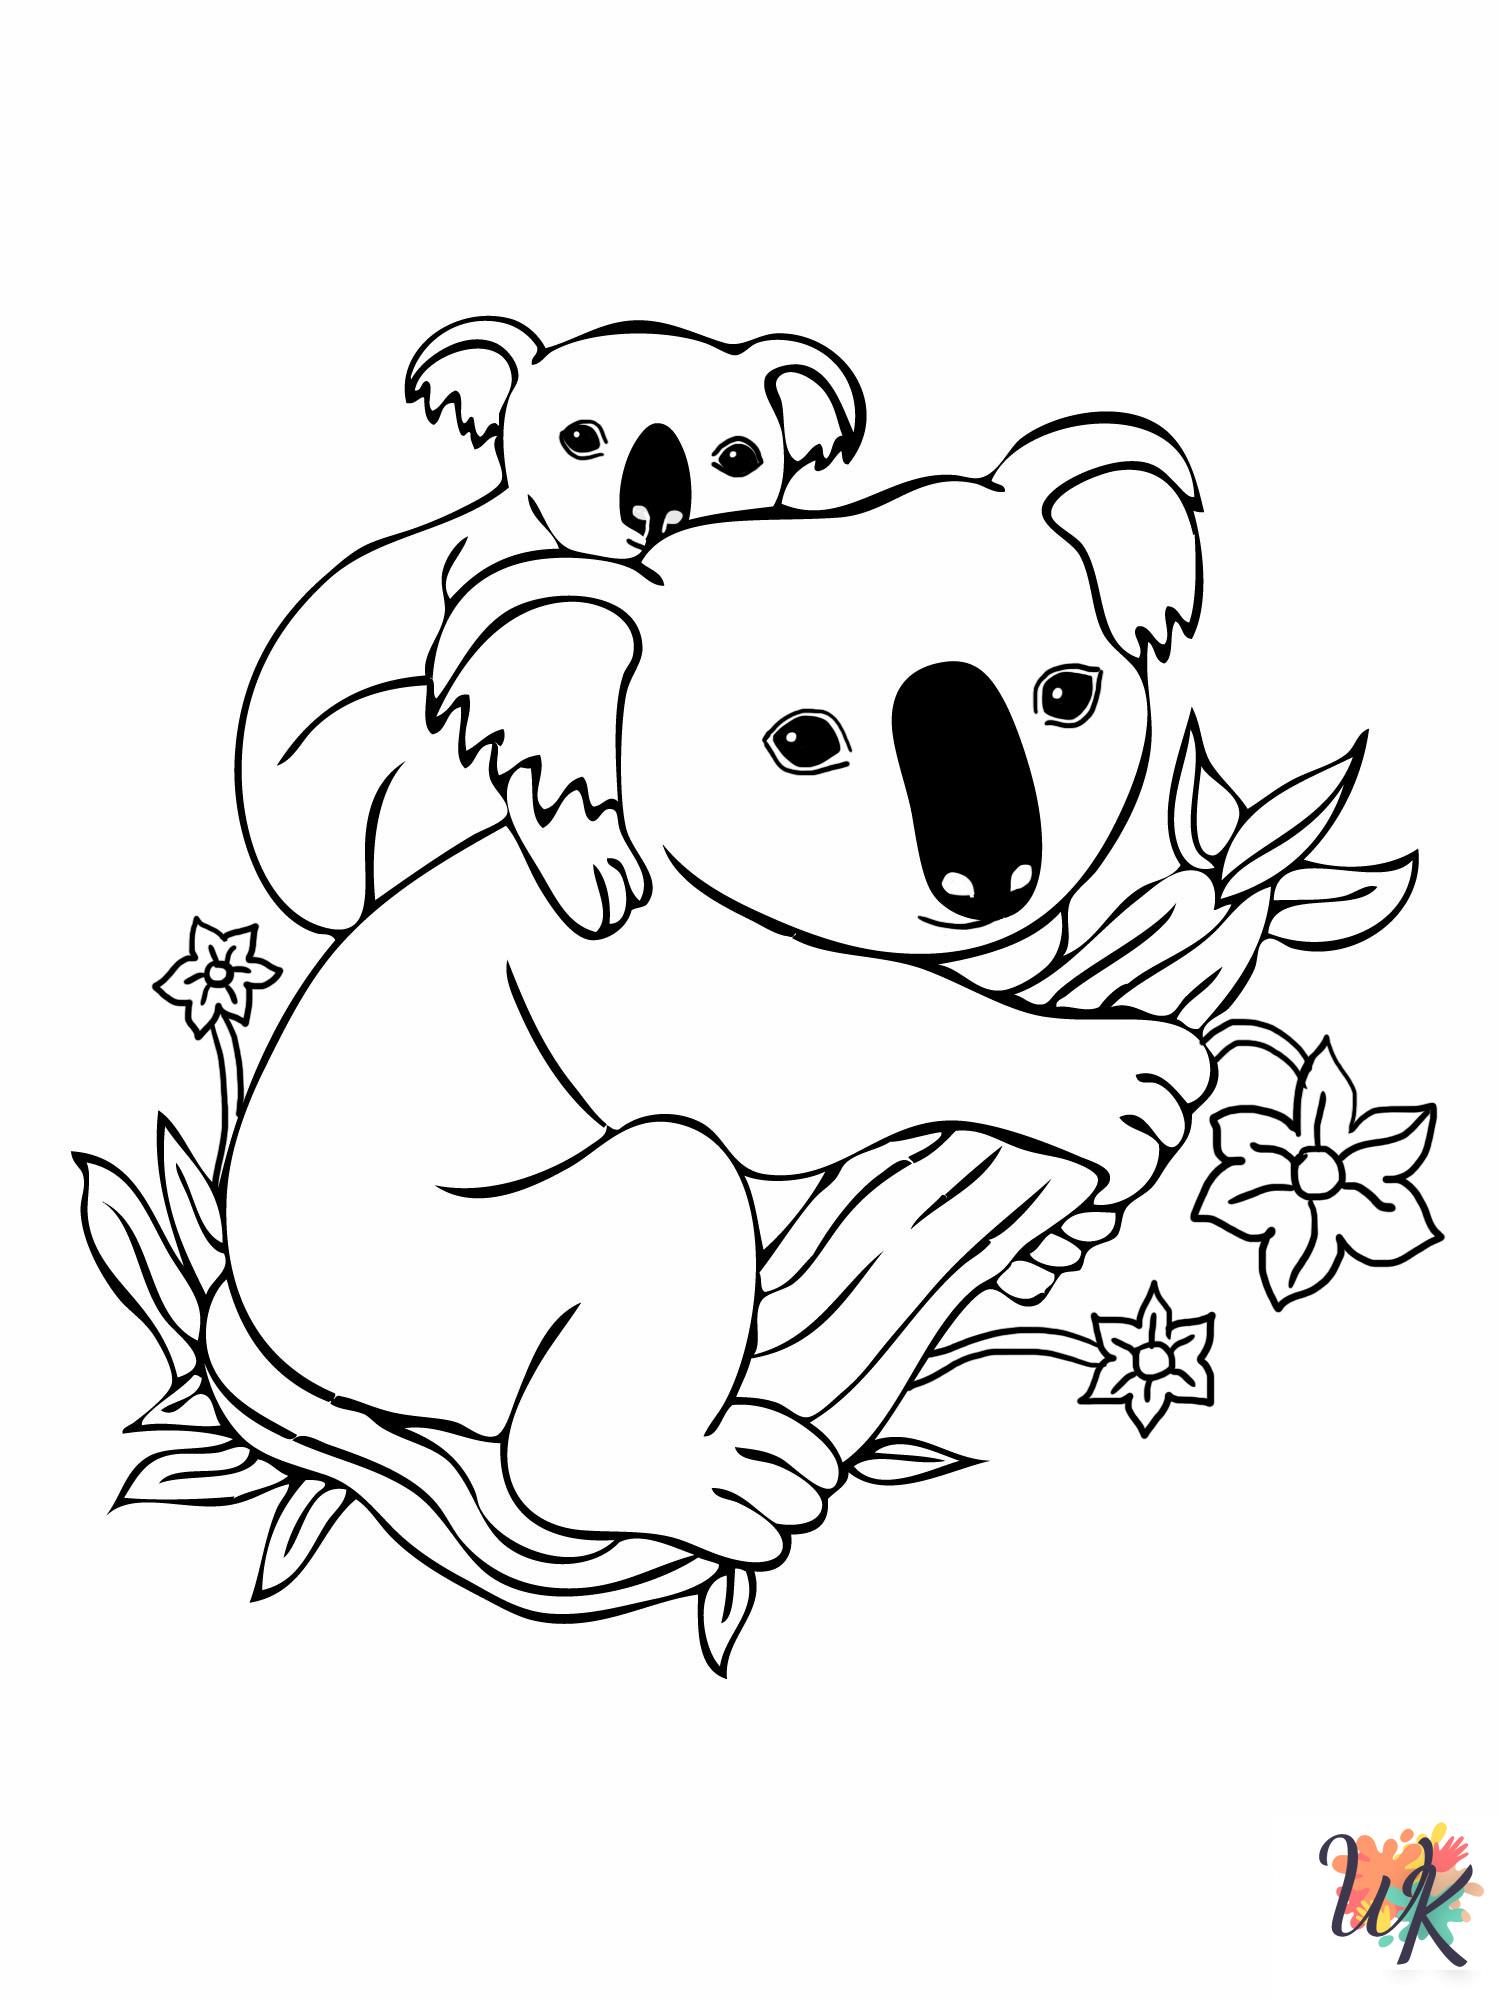 Koala themed coloring pages